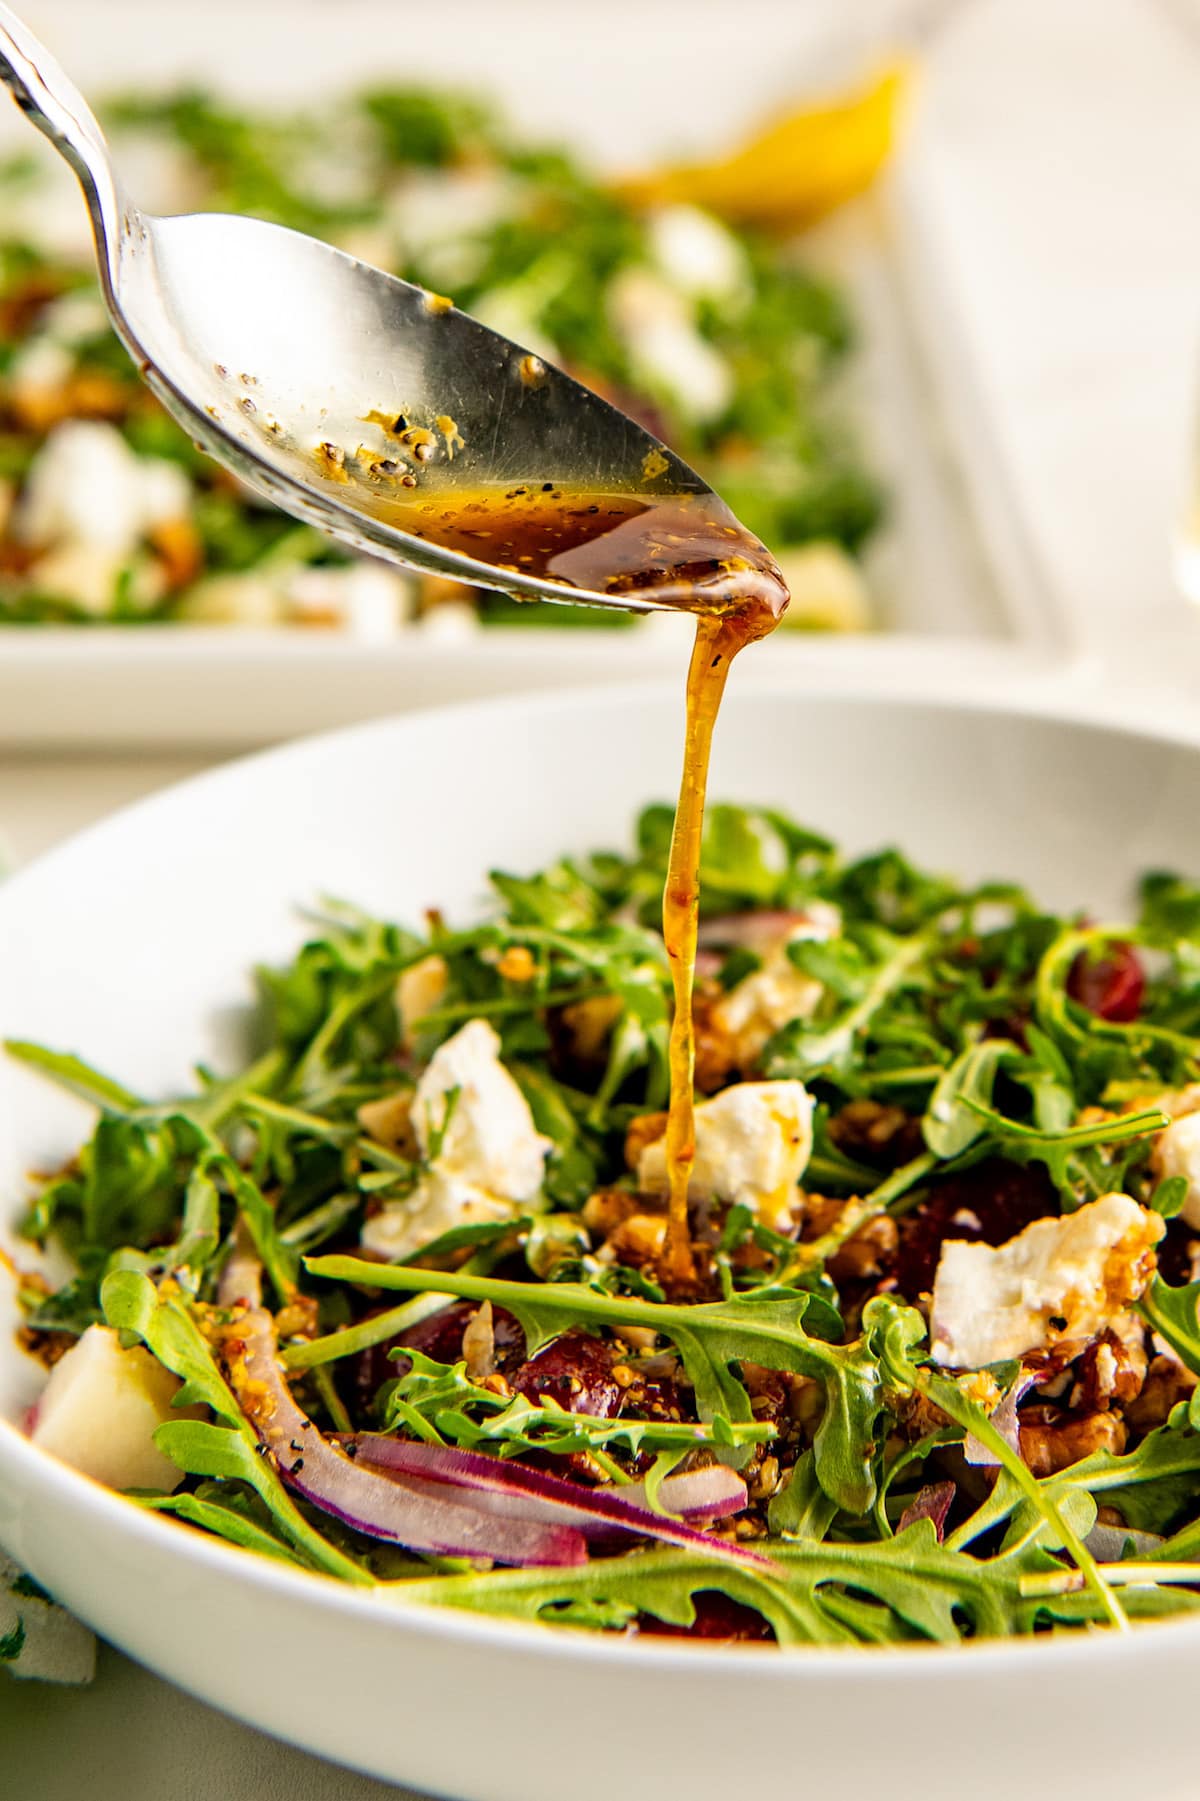 Drizzling homemade salad dressing over a fresh arugula salad with a spoon.